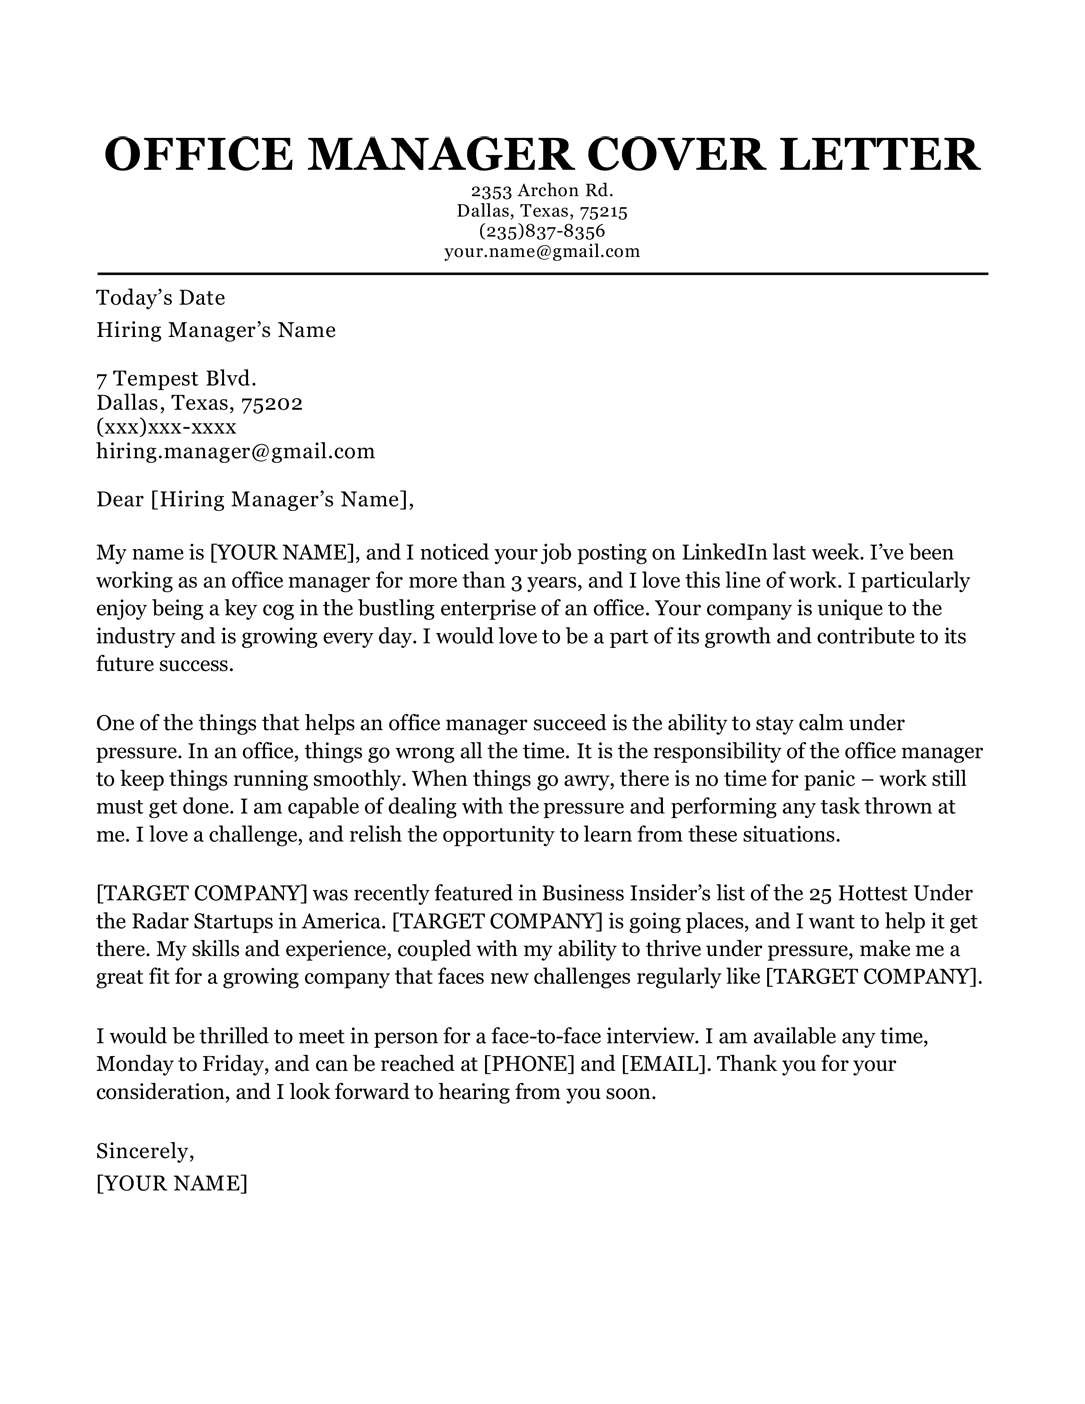 sample cover letter for office manager